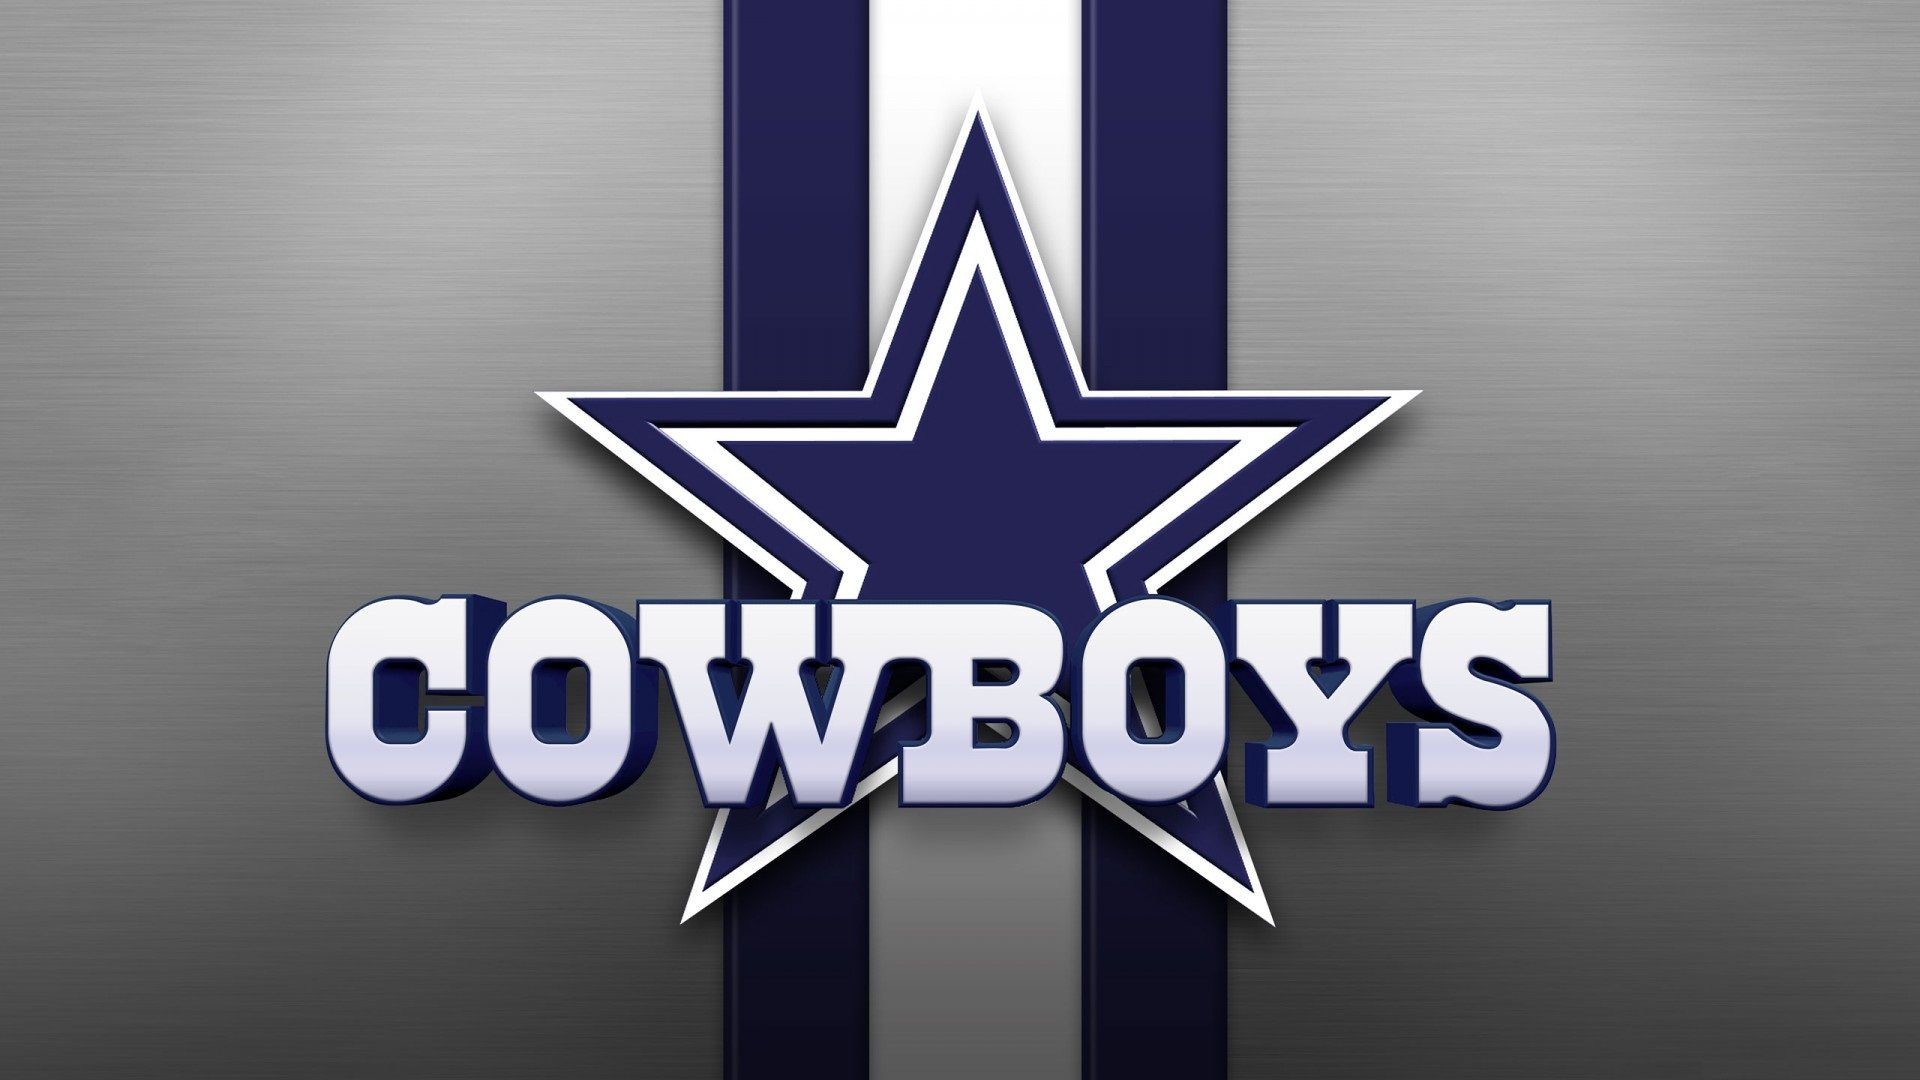 Dallas Cowboys Wallpaper for iPhone 72 images